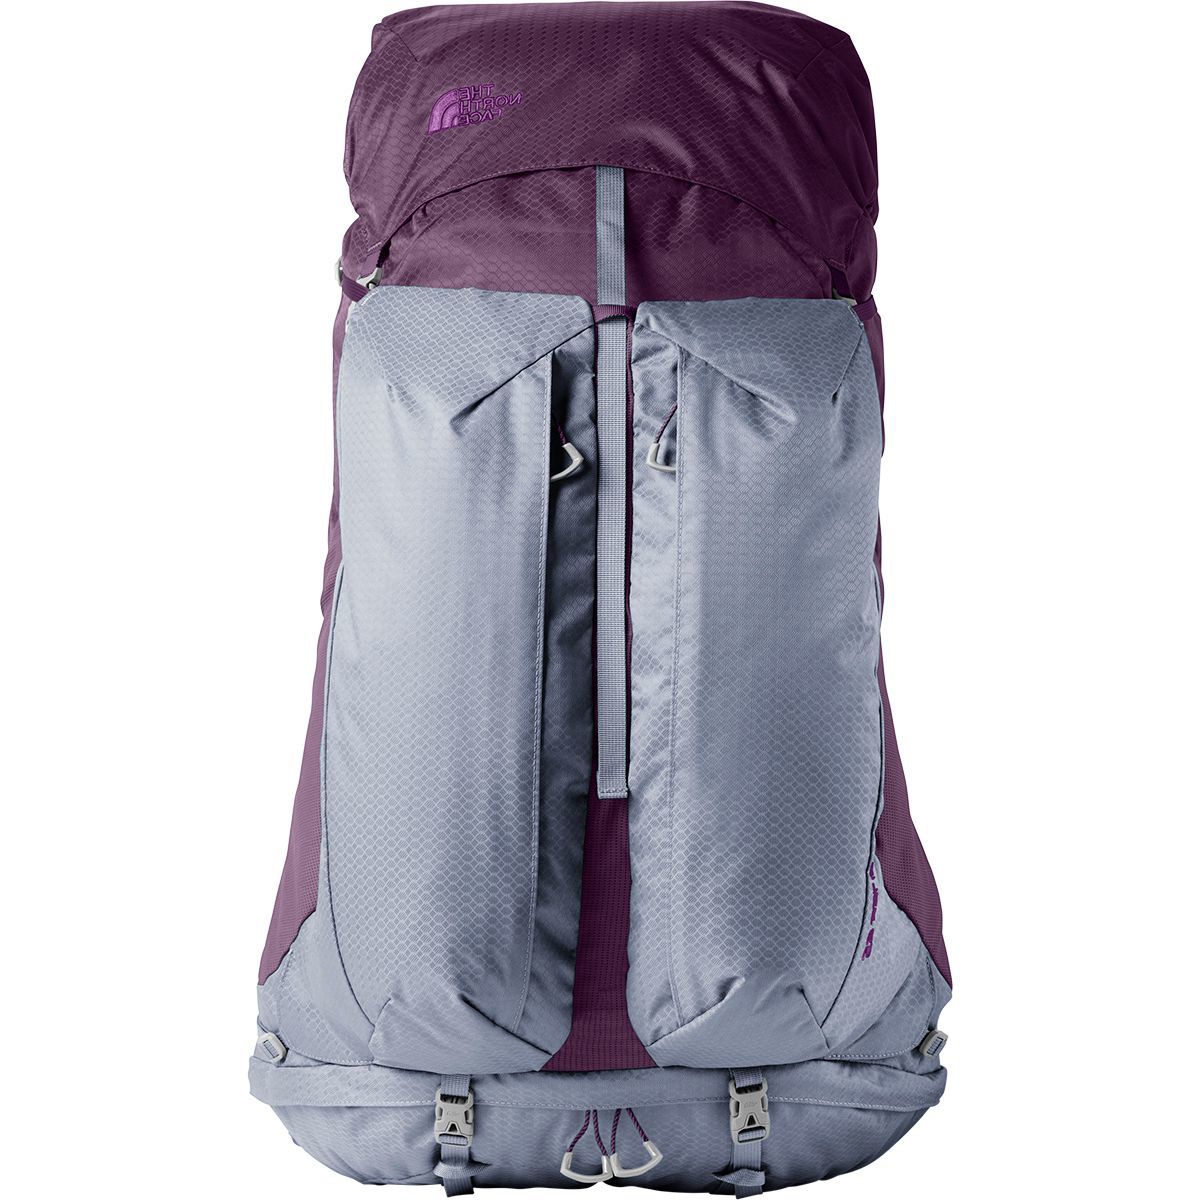 The North Face Banchee 65L Backpack - Women's